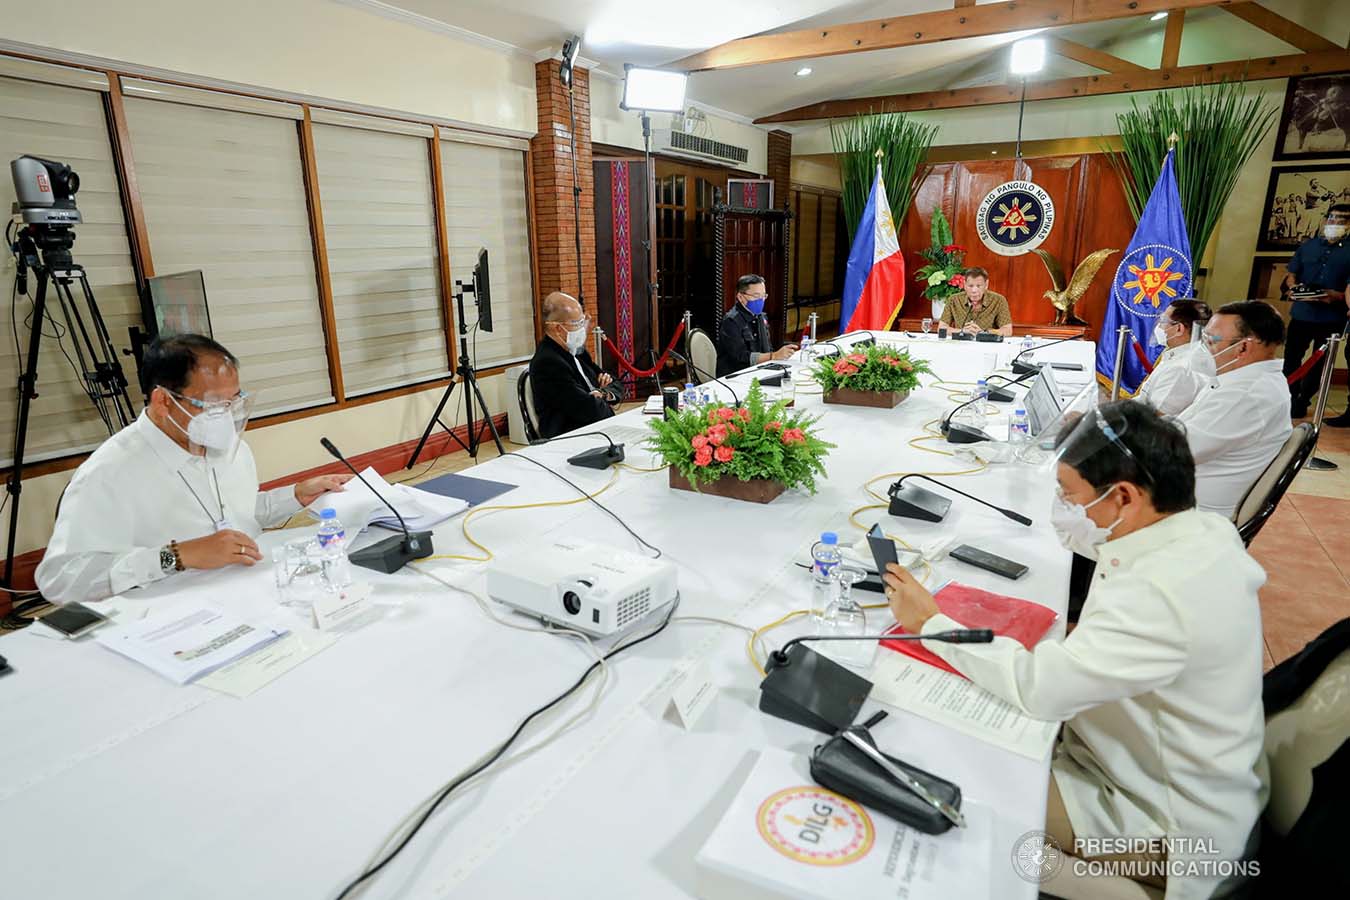 President Rodrigo Roa Duterte presides over a meeting with the Inter-Agency Task Force on the Emerging Infectious Diseases (IATF-EID) core members prior to his talk to the people at the Malago Clubhouse in Malacañang on September 28, 2020. RICHARD MADELO/ PRESIDENTIAL PHOTO